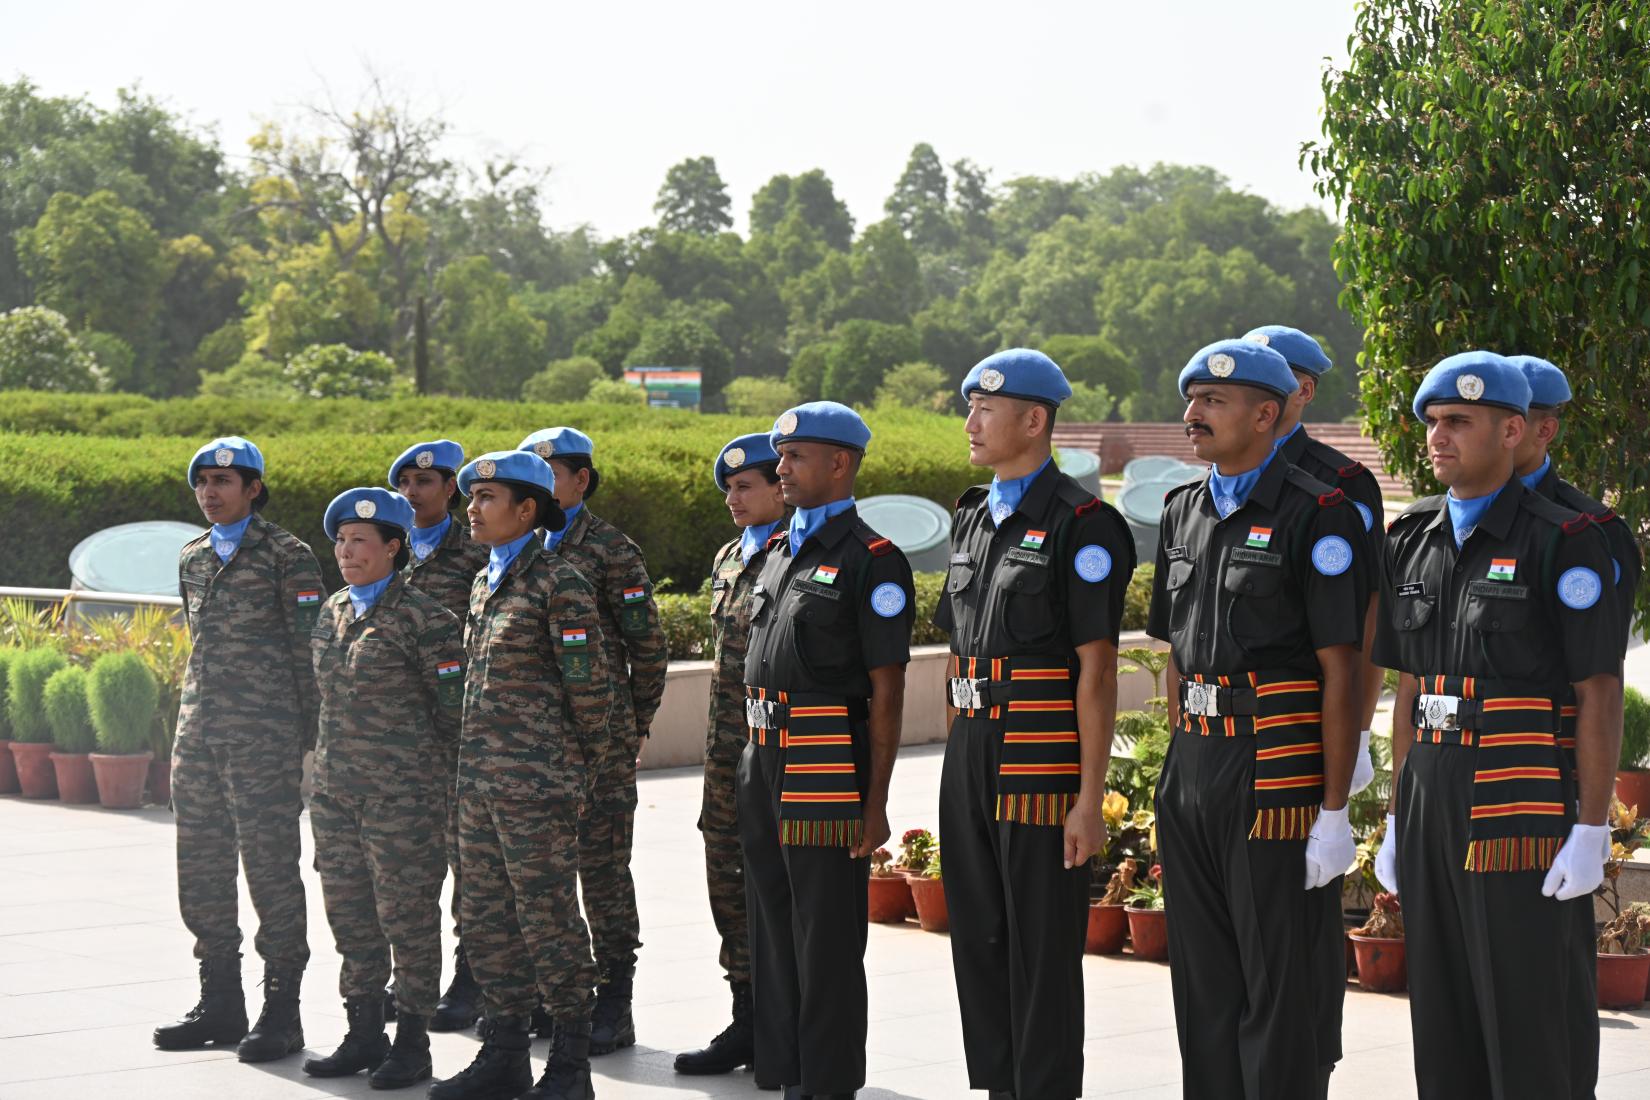 UN in India joined countries across the globe to pay homage to the professionalism, dedication and courage of men and women who have served/are serving in UN Peacekeeping Missions.